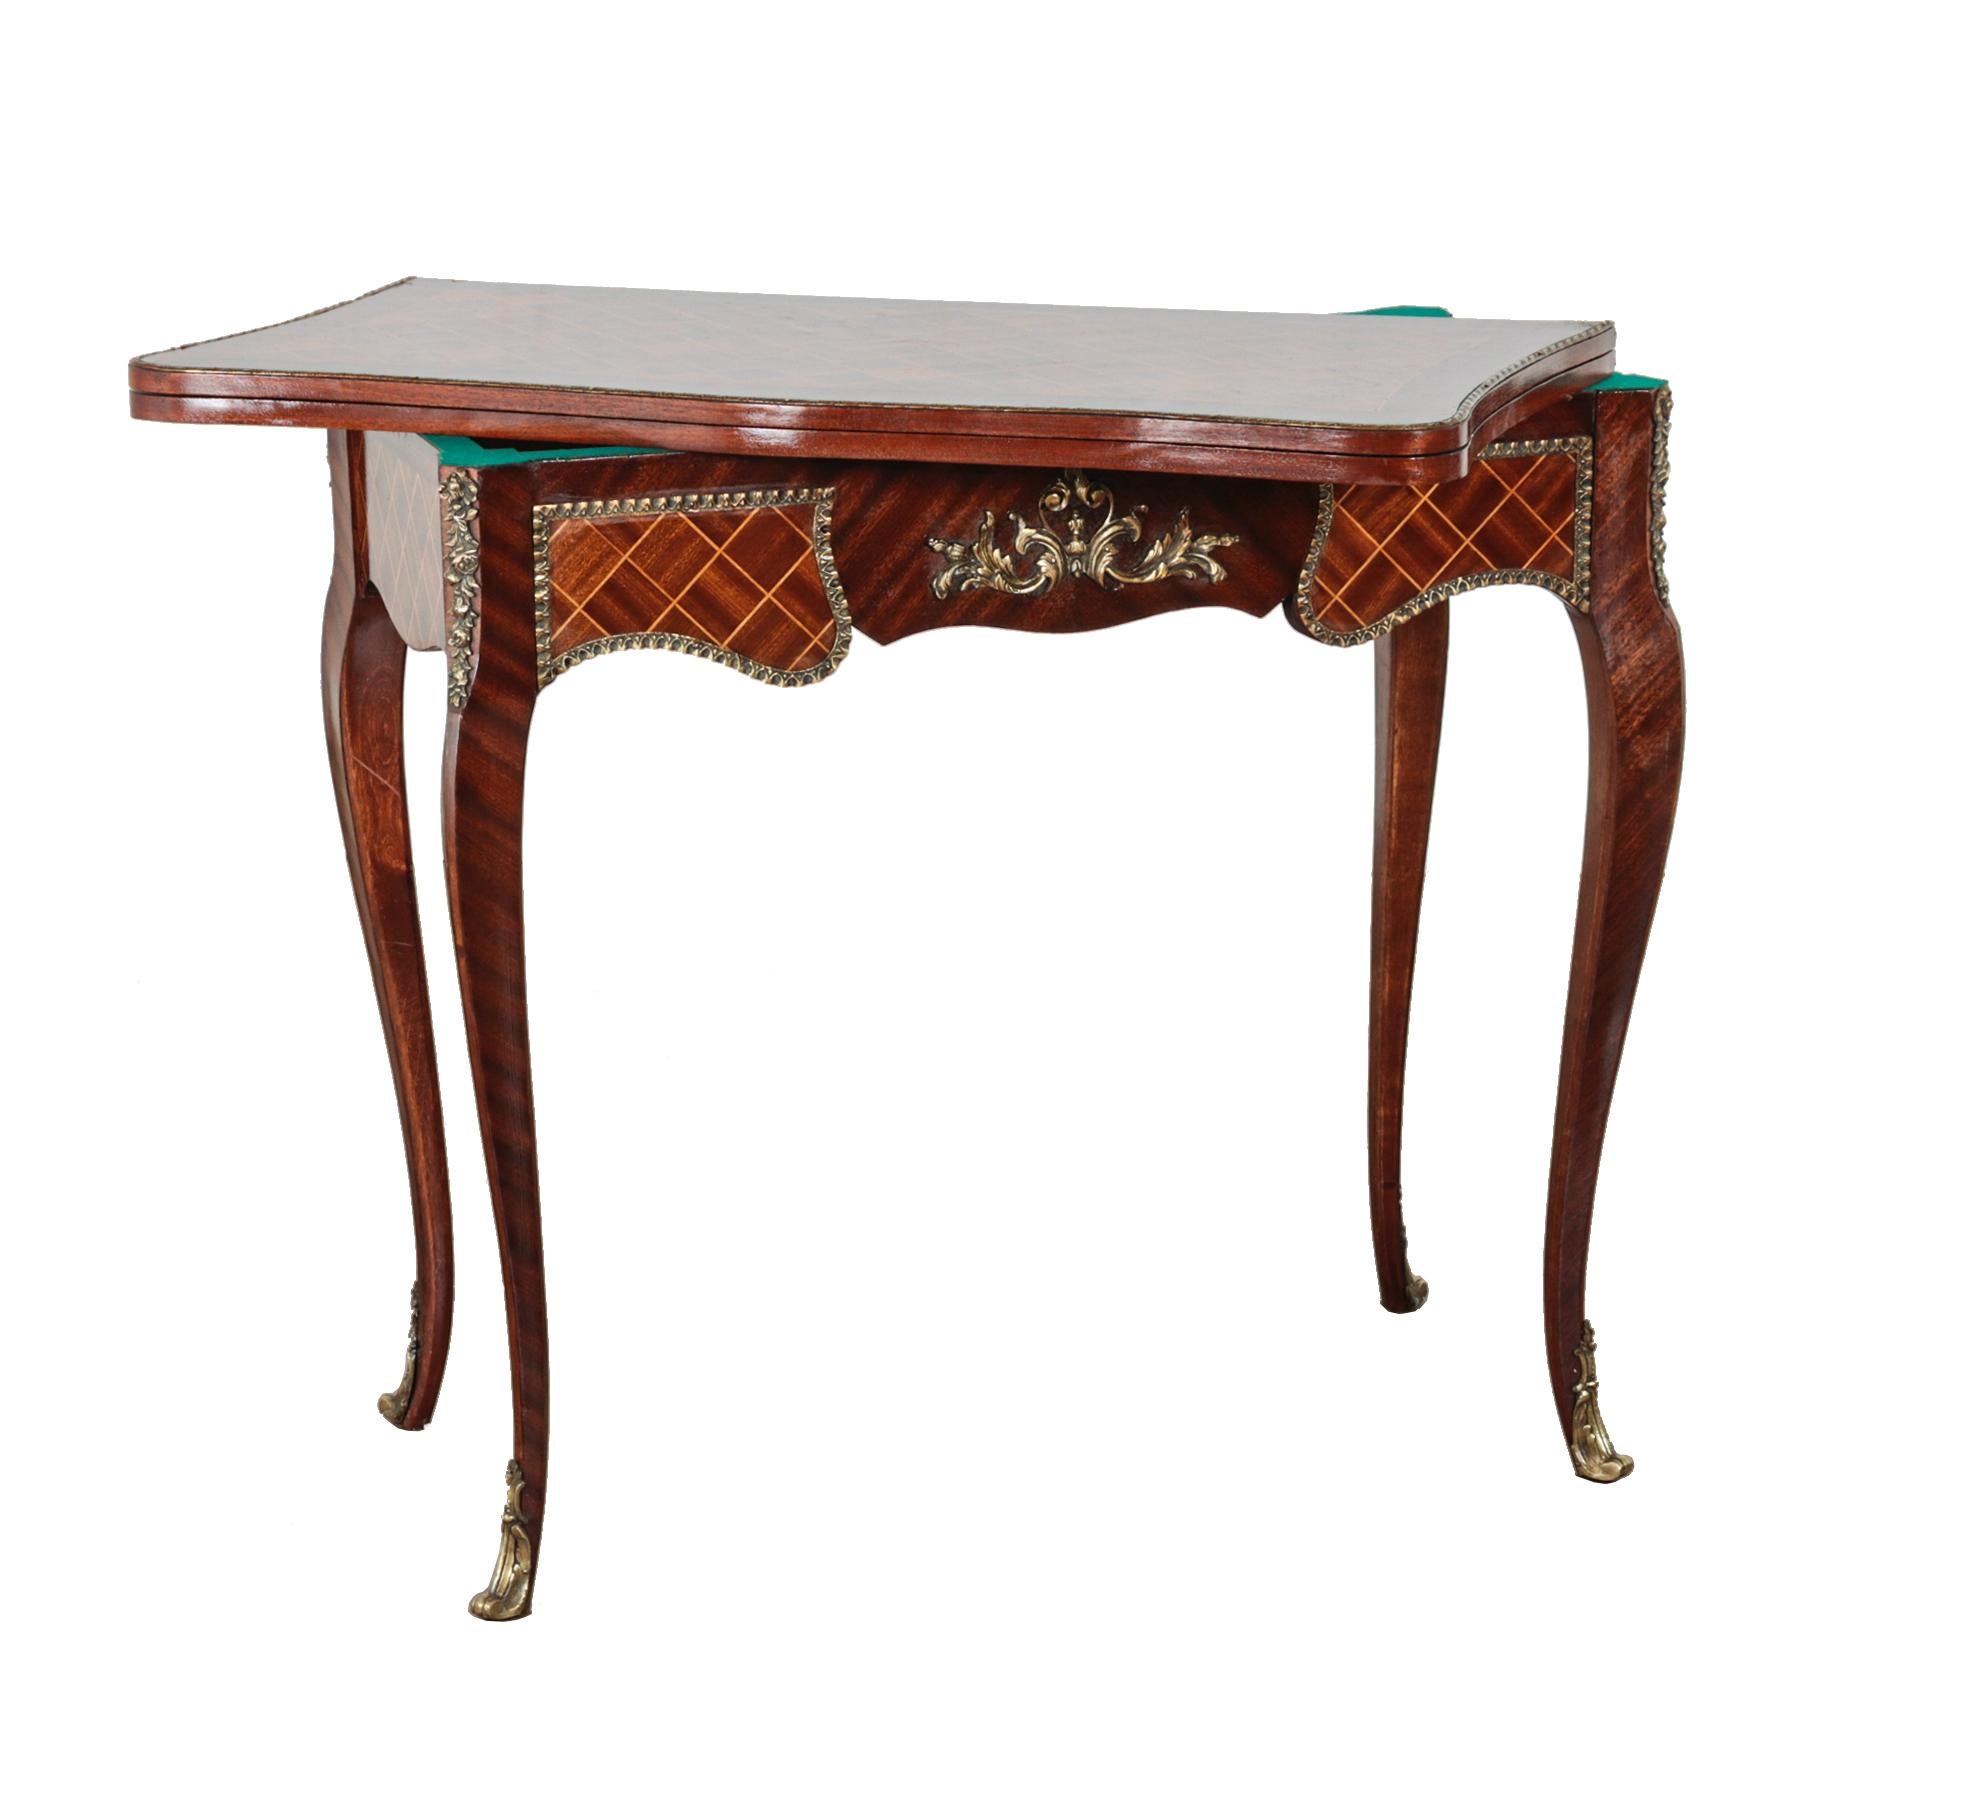 - Gorgeous antique French card table we date to circa 1890 and in the French Empire style
- Features intricate parquetry work to the front
- Ormolu fixtures are well cast and with greta patina
- Top swivels out and opens to reveal green beize